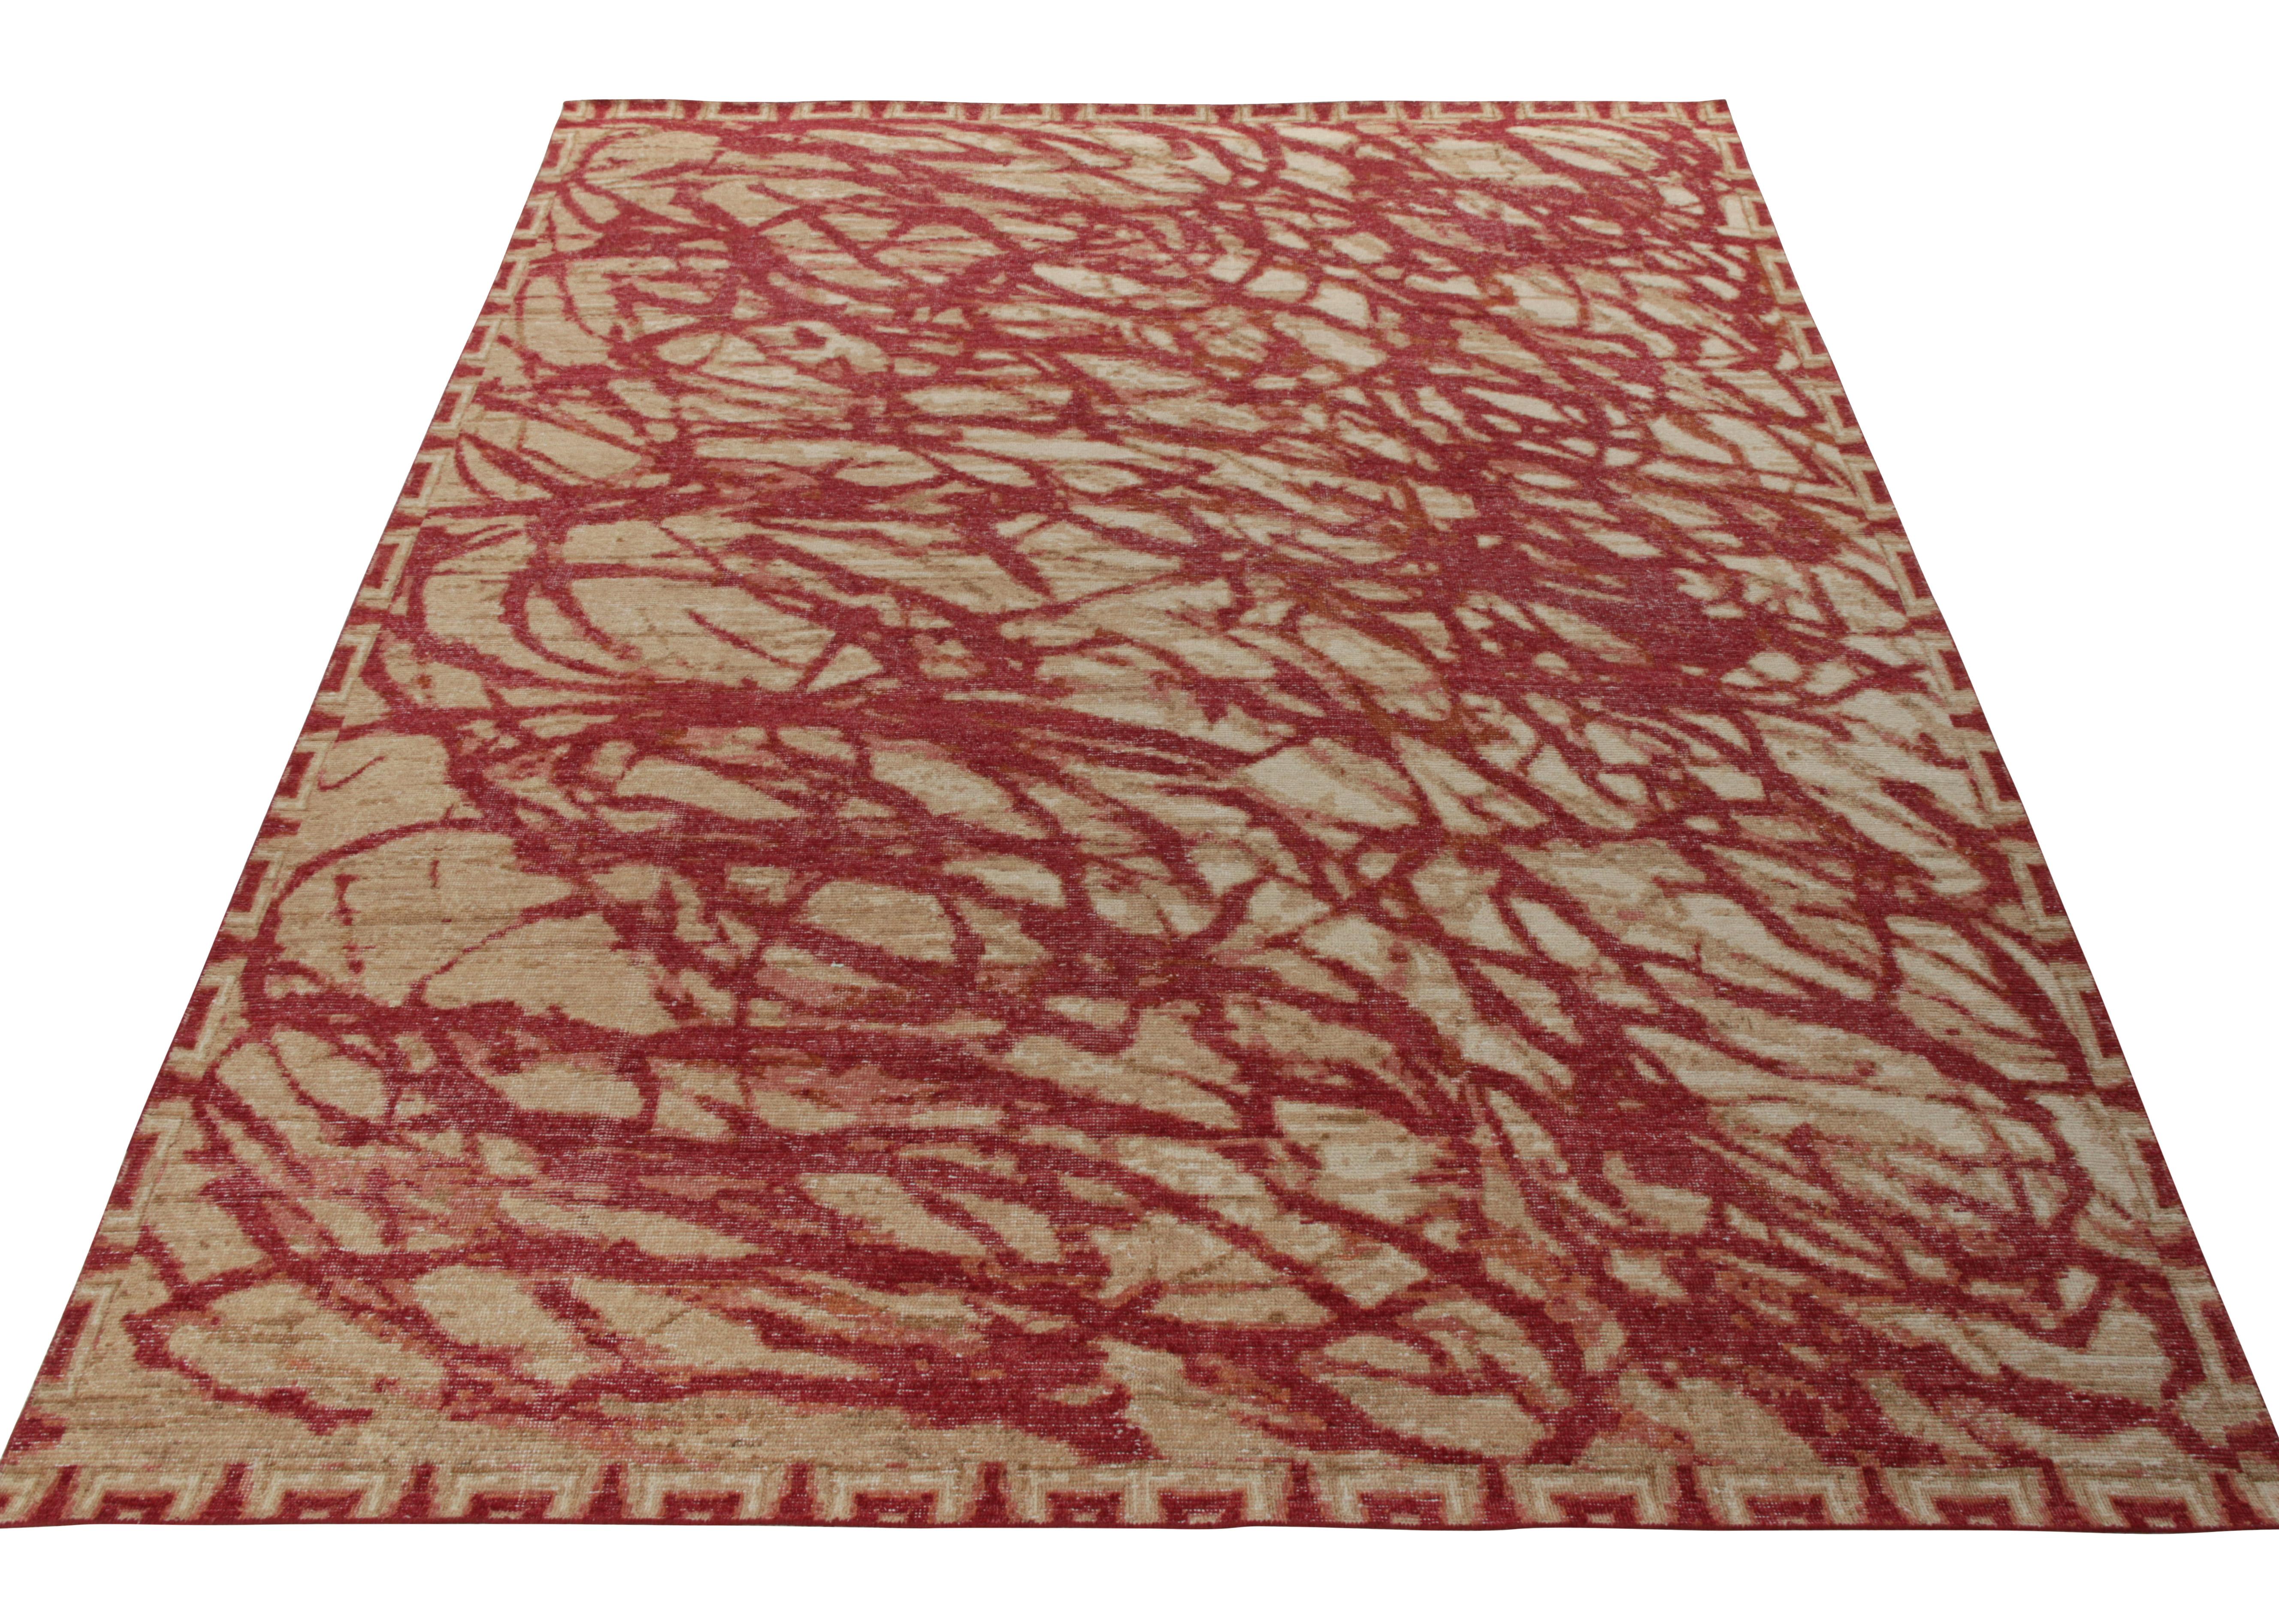 Rug & Kilim presents a prestigious 9x12 piece in distressed style from its exclusive Homage Collection. Embracing a modern abstract thought process, the rug effortlessly embodies a shabby chic look that distinctively complements the hand-knotted